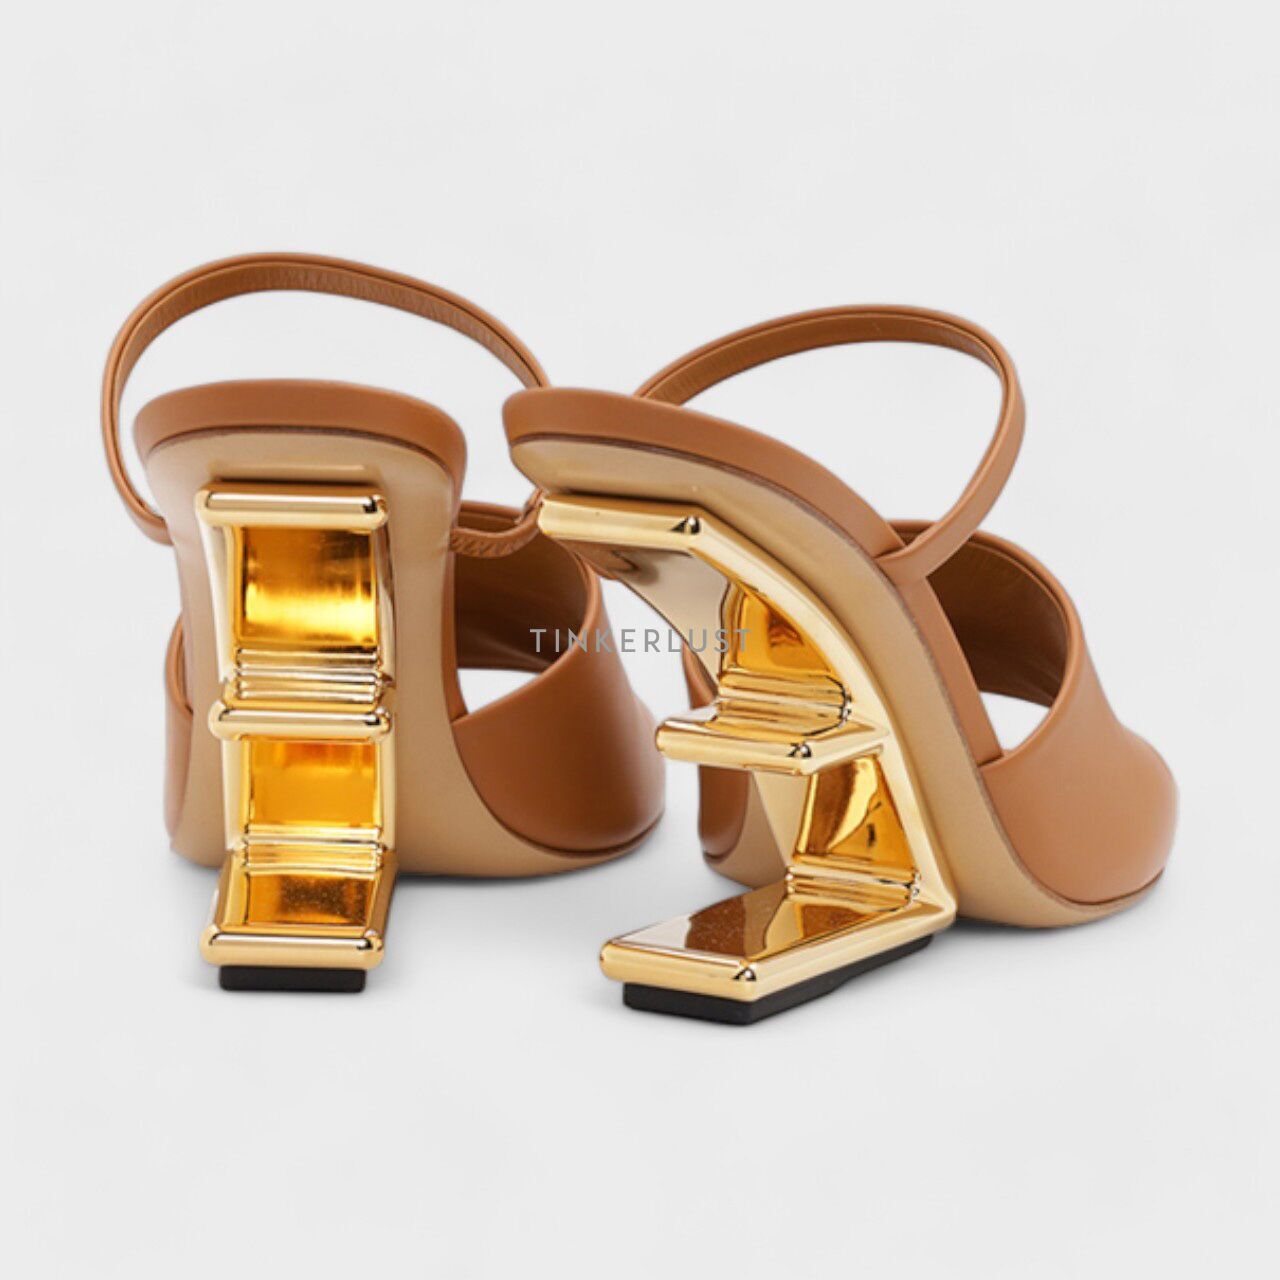 Fendi Women First Open Toe Sandals 105mm in Caramel Leather with Diagonal F-Shaped Heels